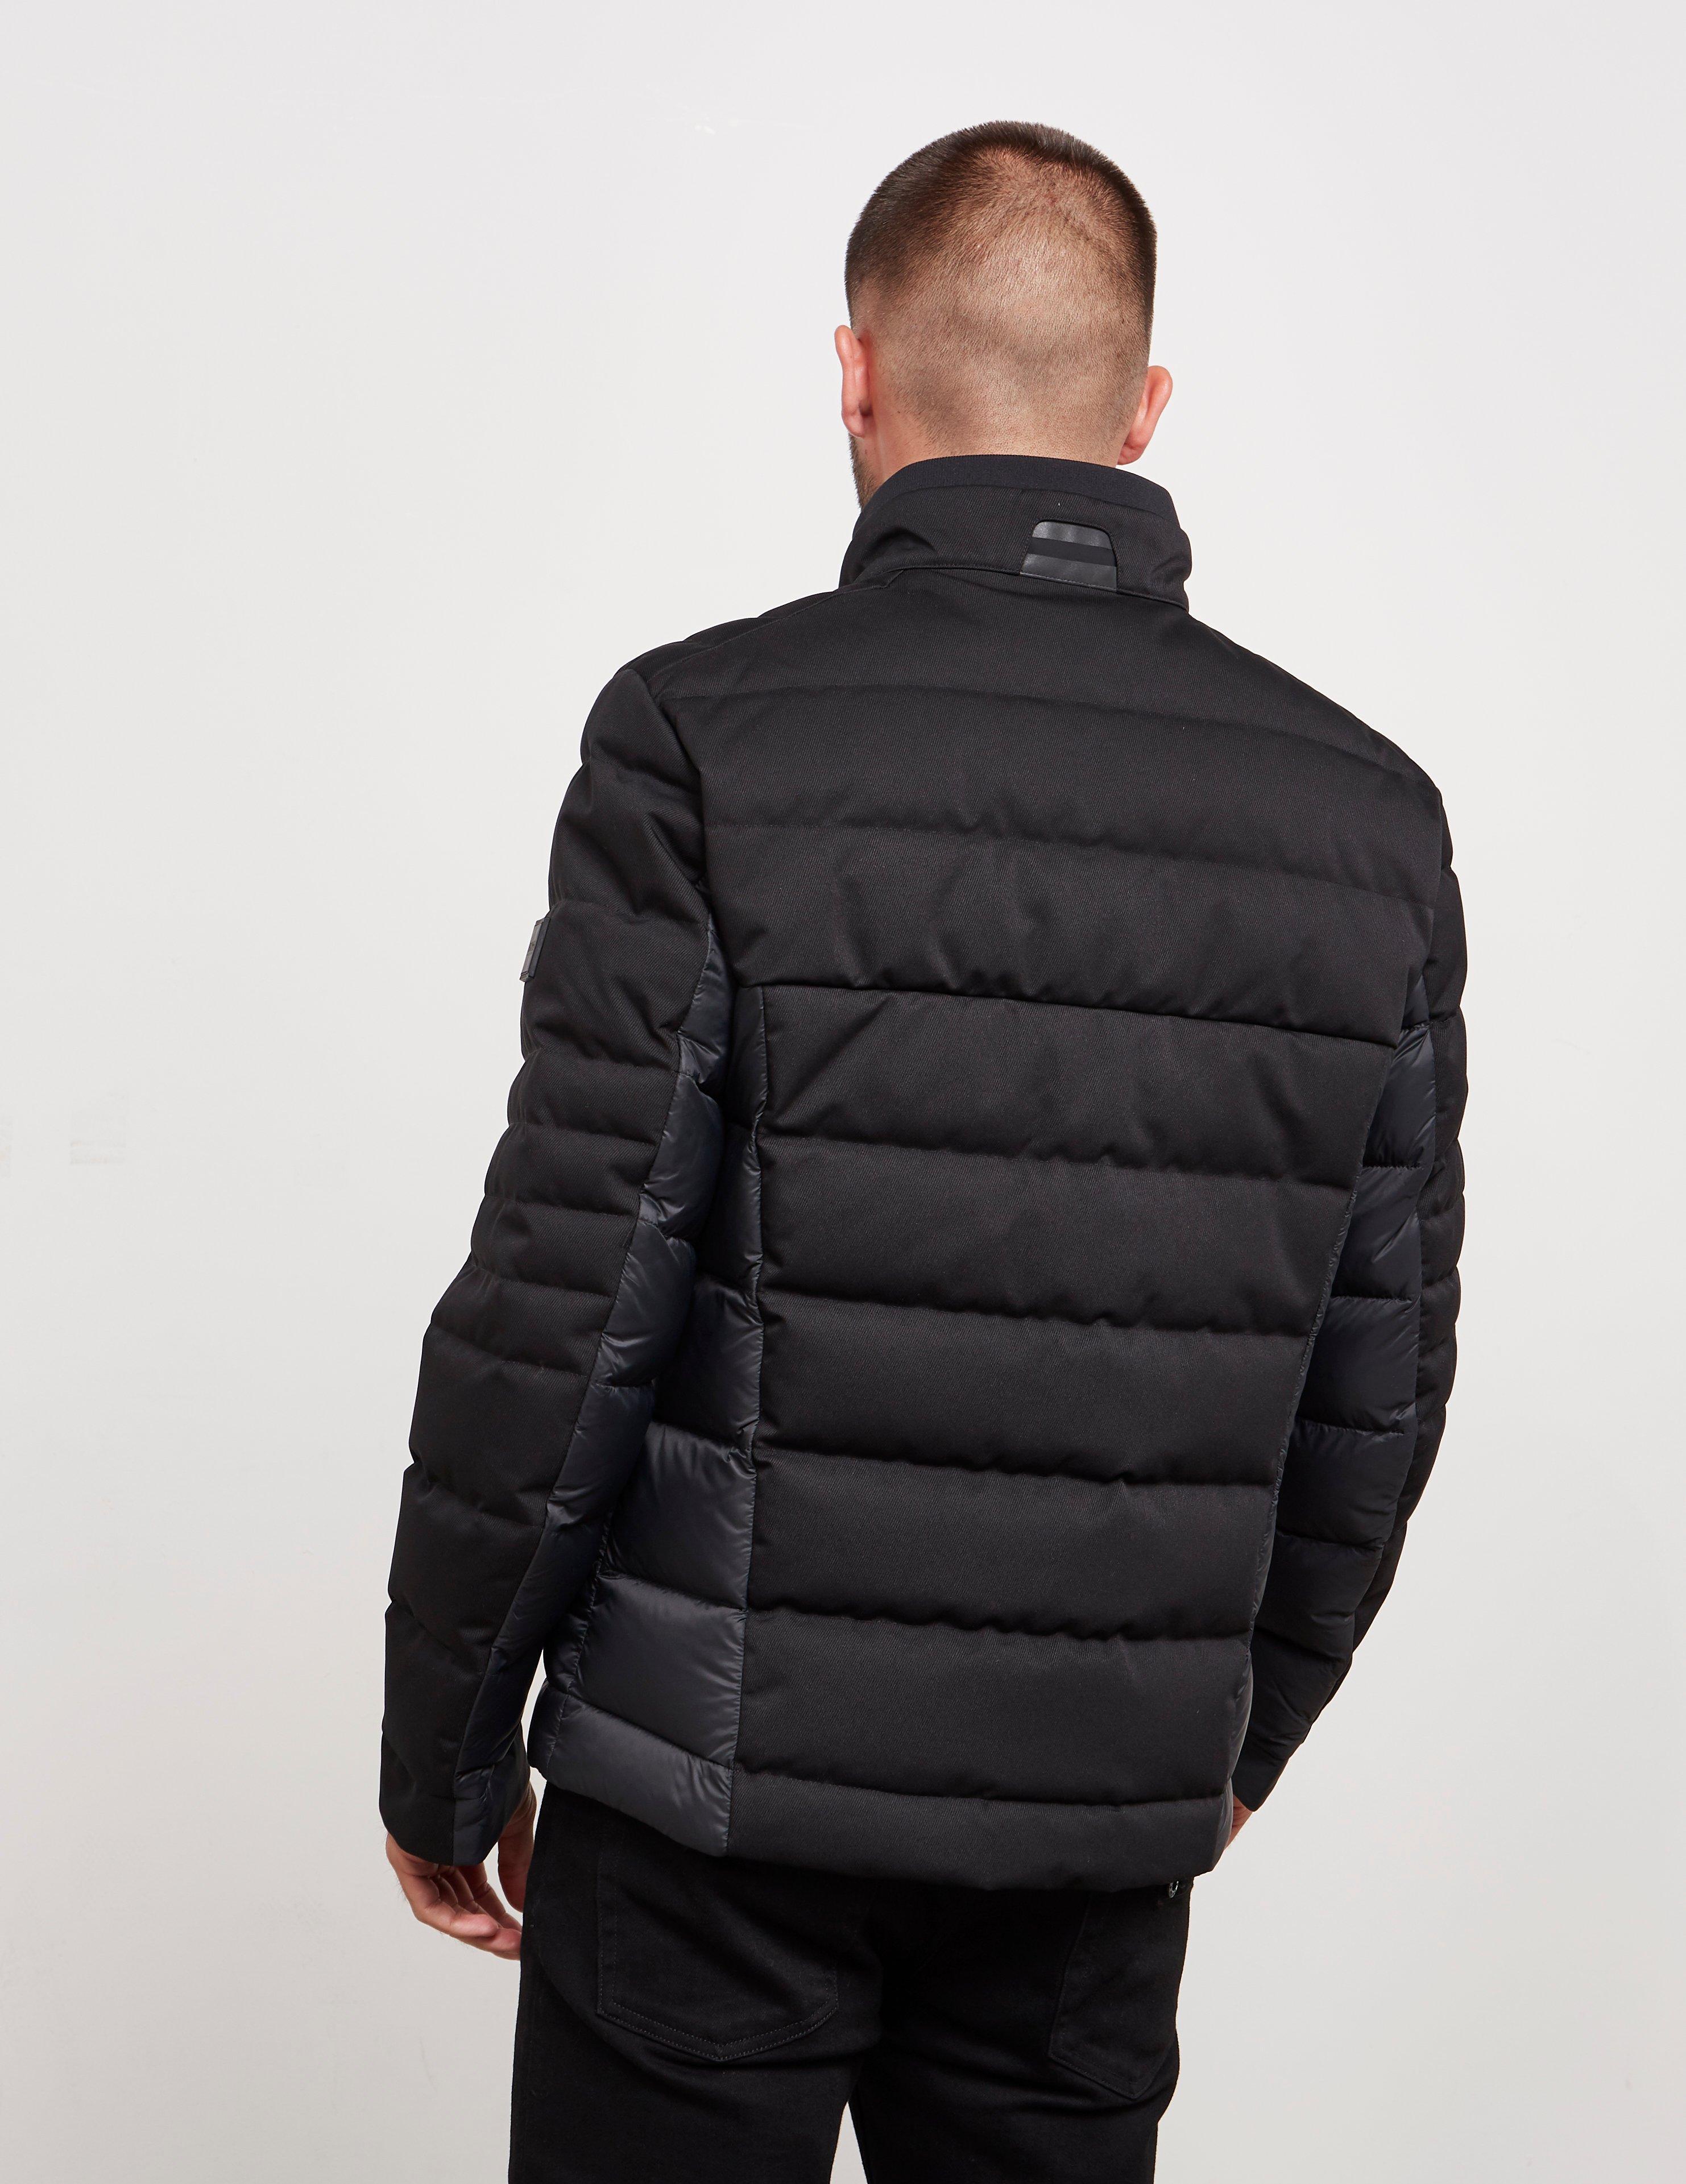 Boss Athleisure Quilted Jacket Store, SAVE 44% - lutheranems.com